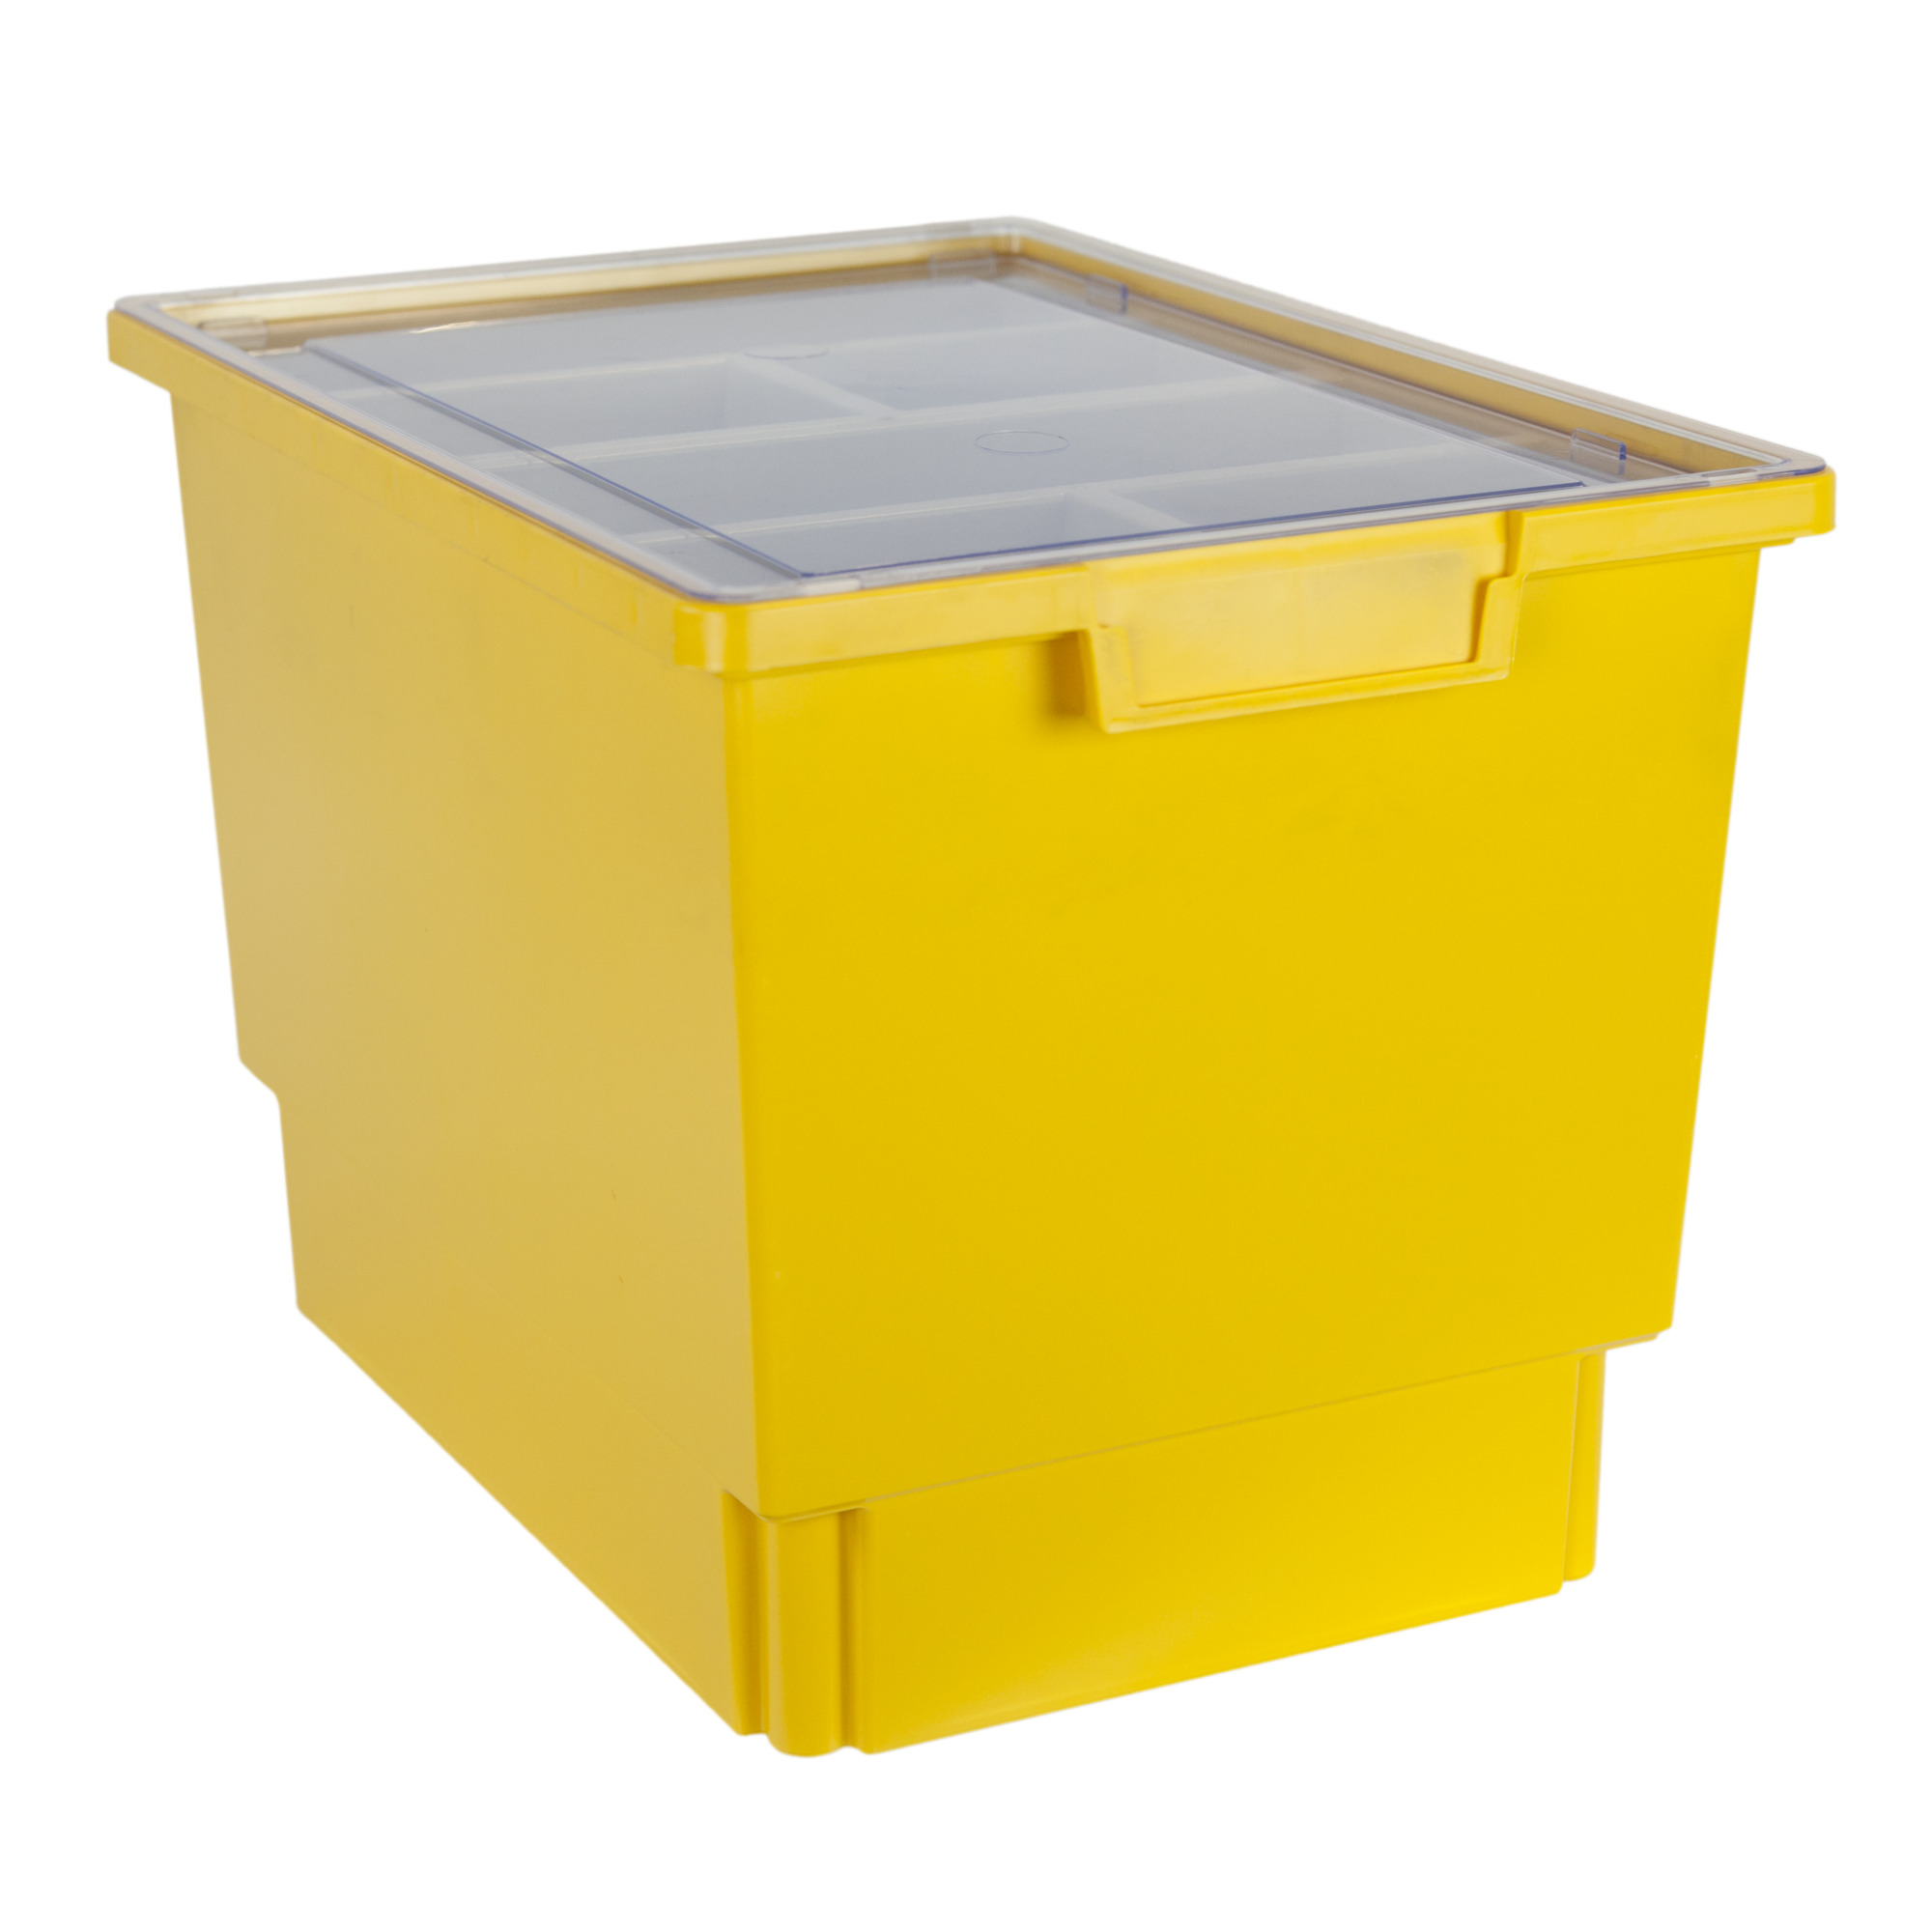 Certwood StorWerks, Slim Line 12Inch Tray Kit (3 x Divisions) Yellow-3PK, Included (qty.) 3, Material Plastic, Height 12 in, Model CE1954PY-NK0202-3